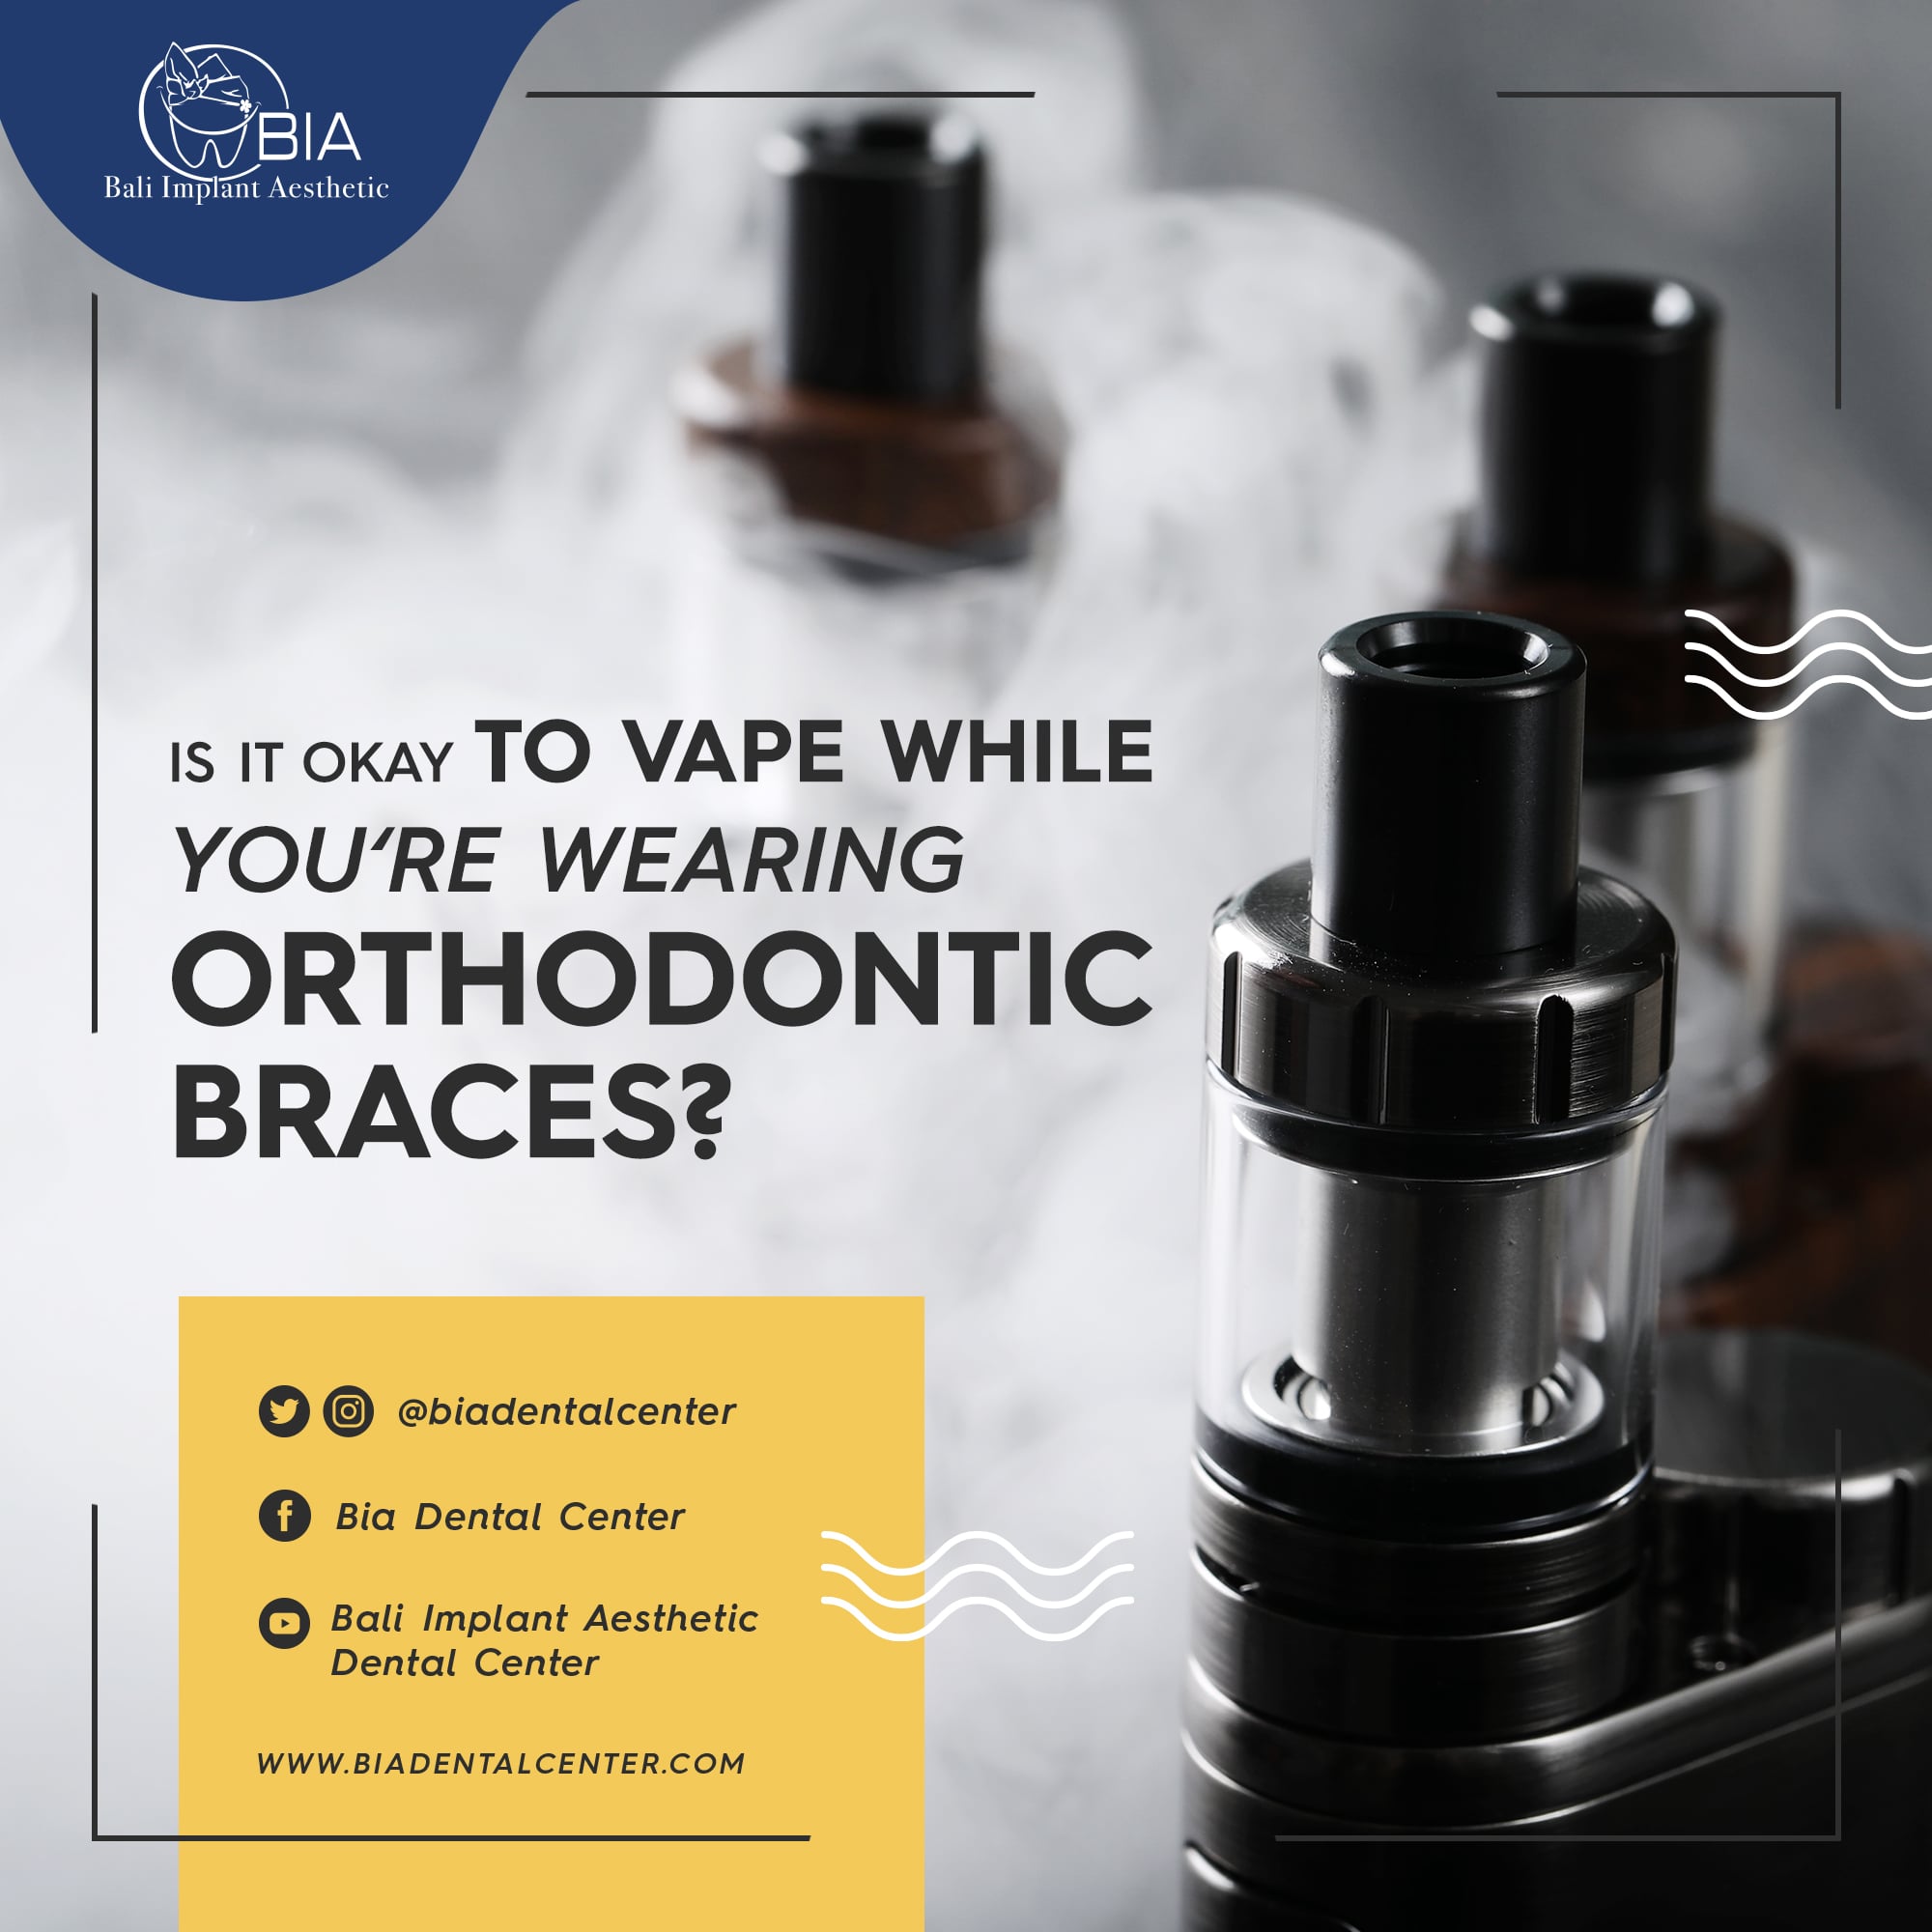 Is it Okay While You're Wearing - Bali Implant Aesthetic (BIA) Dental Center